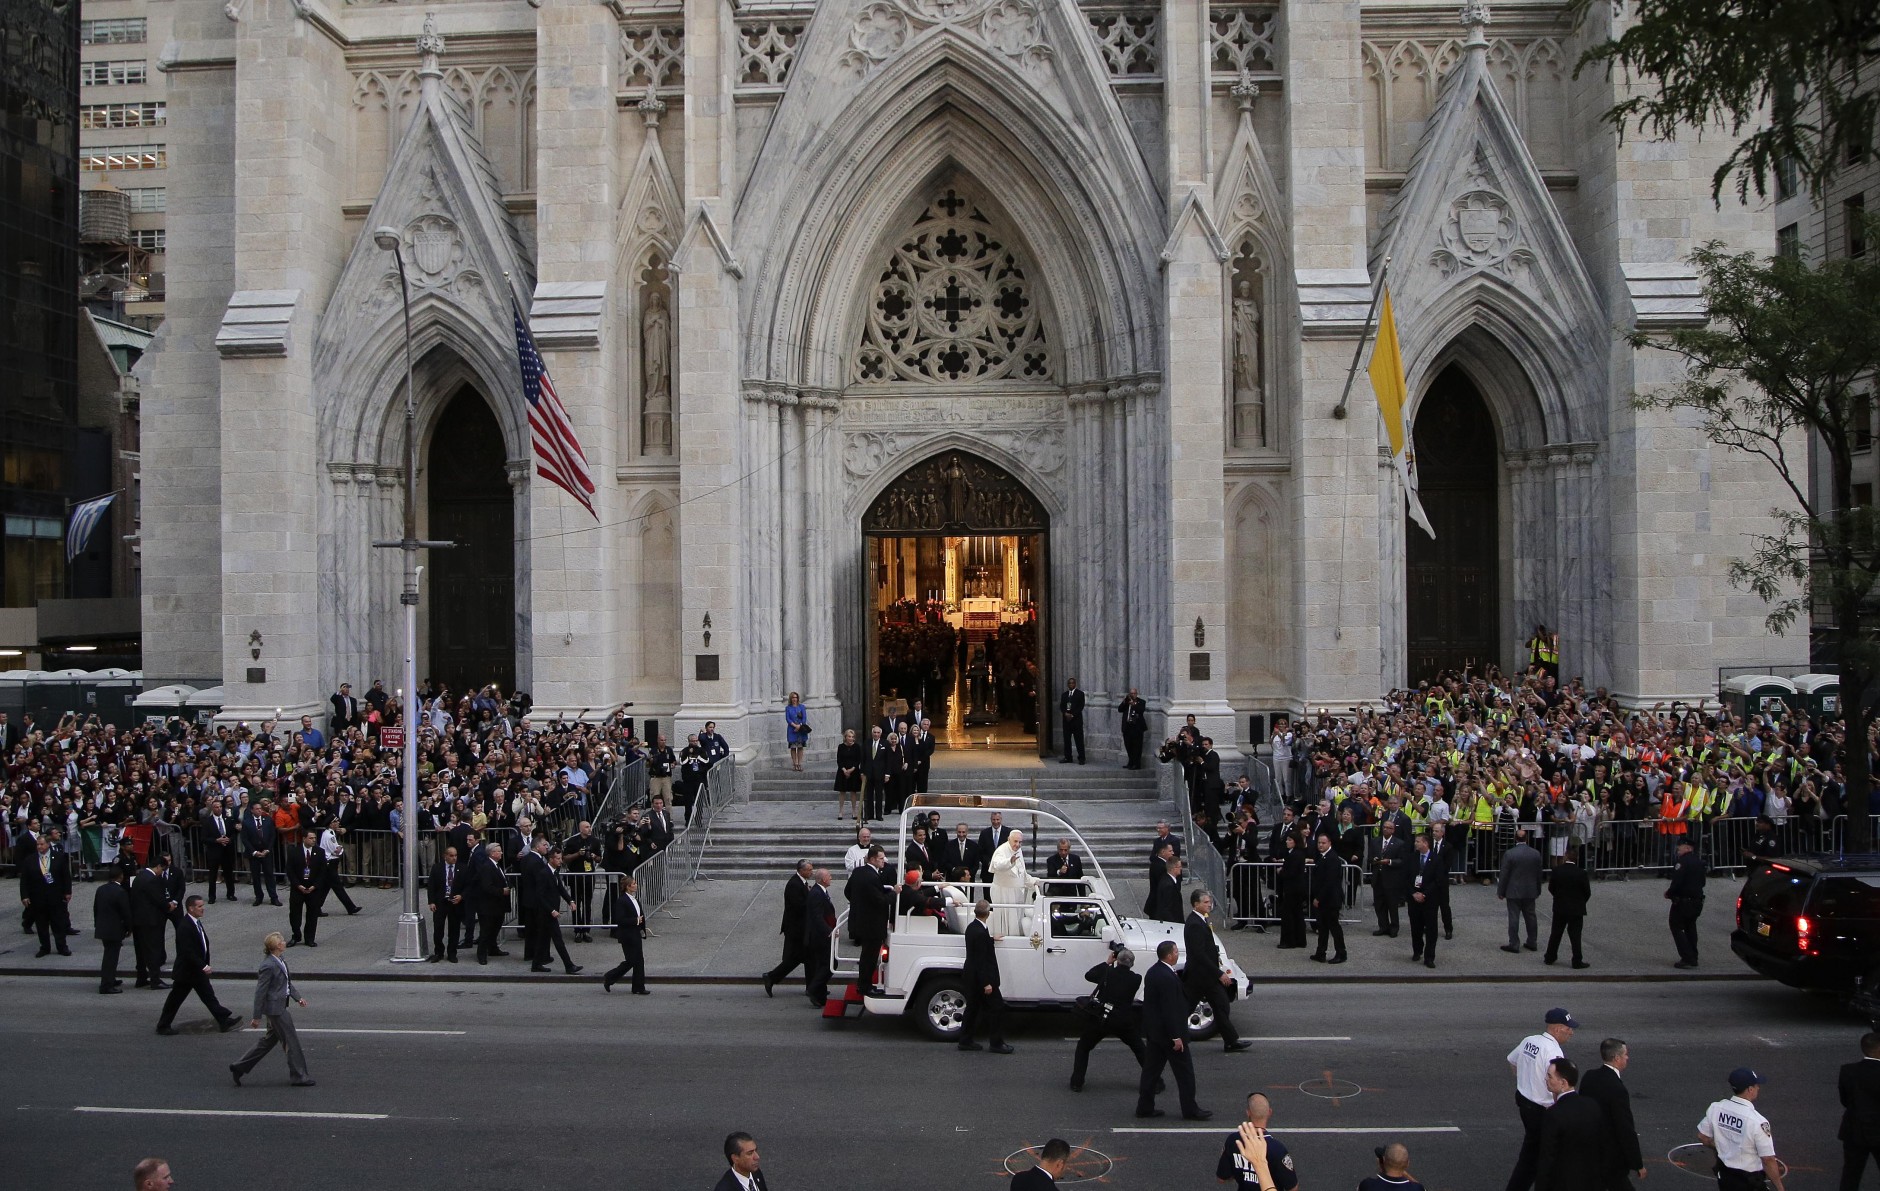 Pope Francis waves as he arrives at St. Patrick's Cathedral to lead an evening prayer service, Thursday, Sept. 24, 2015, in New York. (AP Photo/Julie Jacobson)